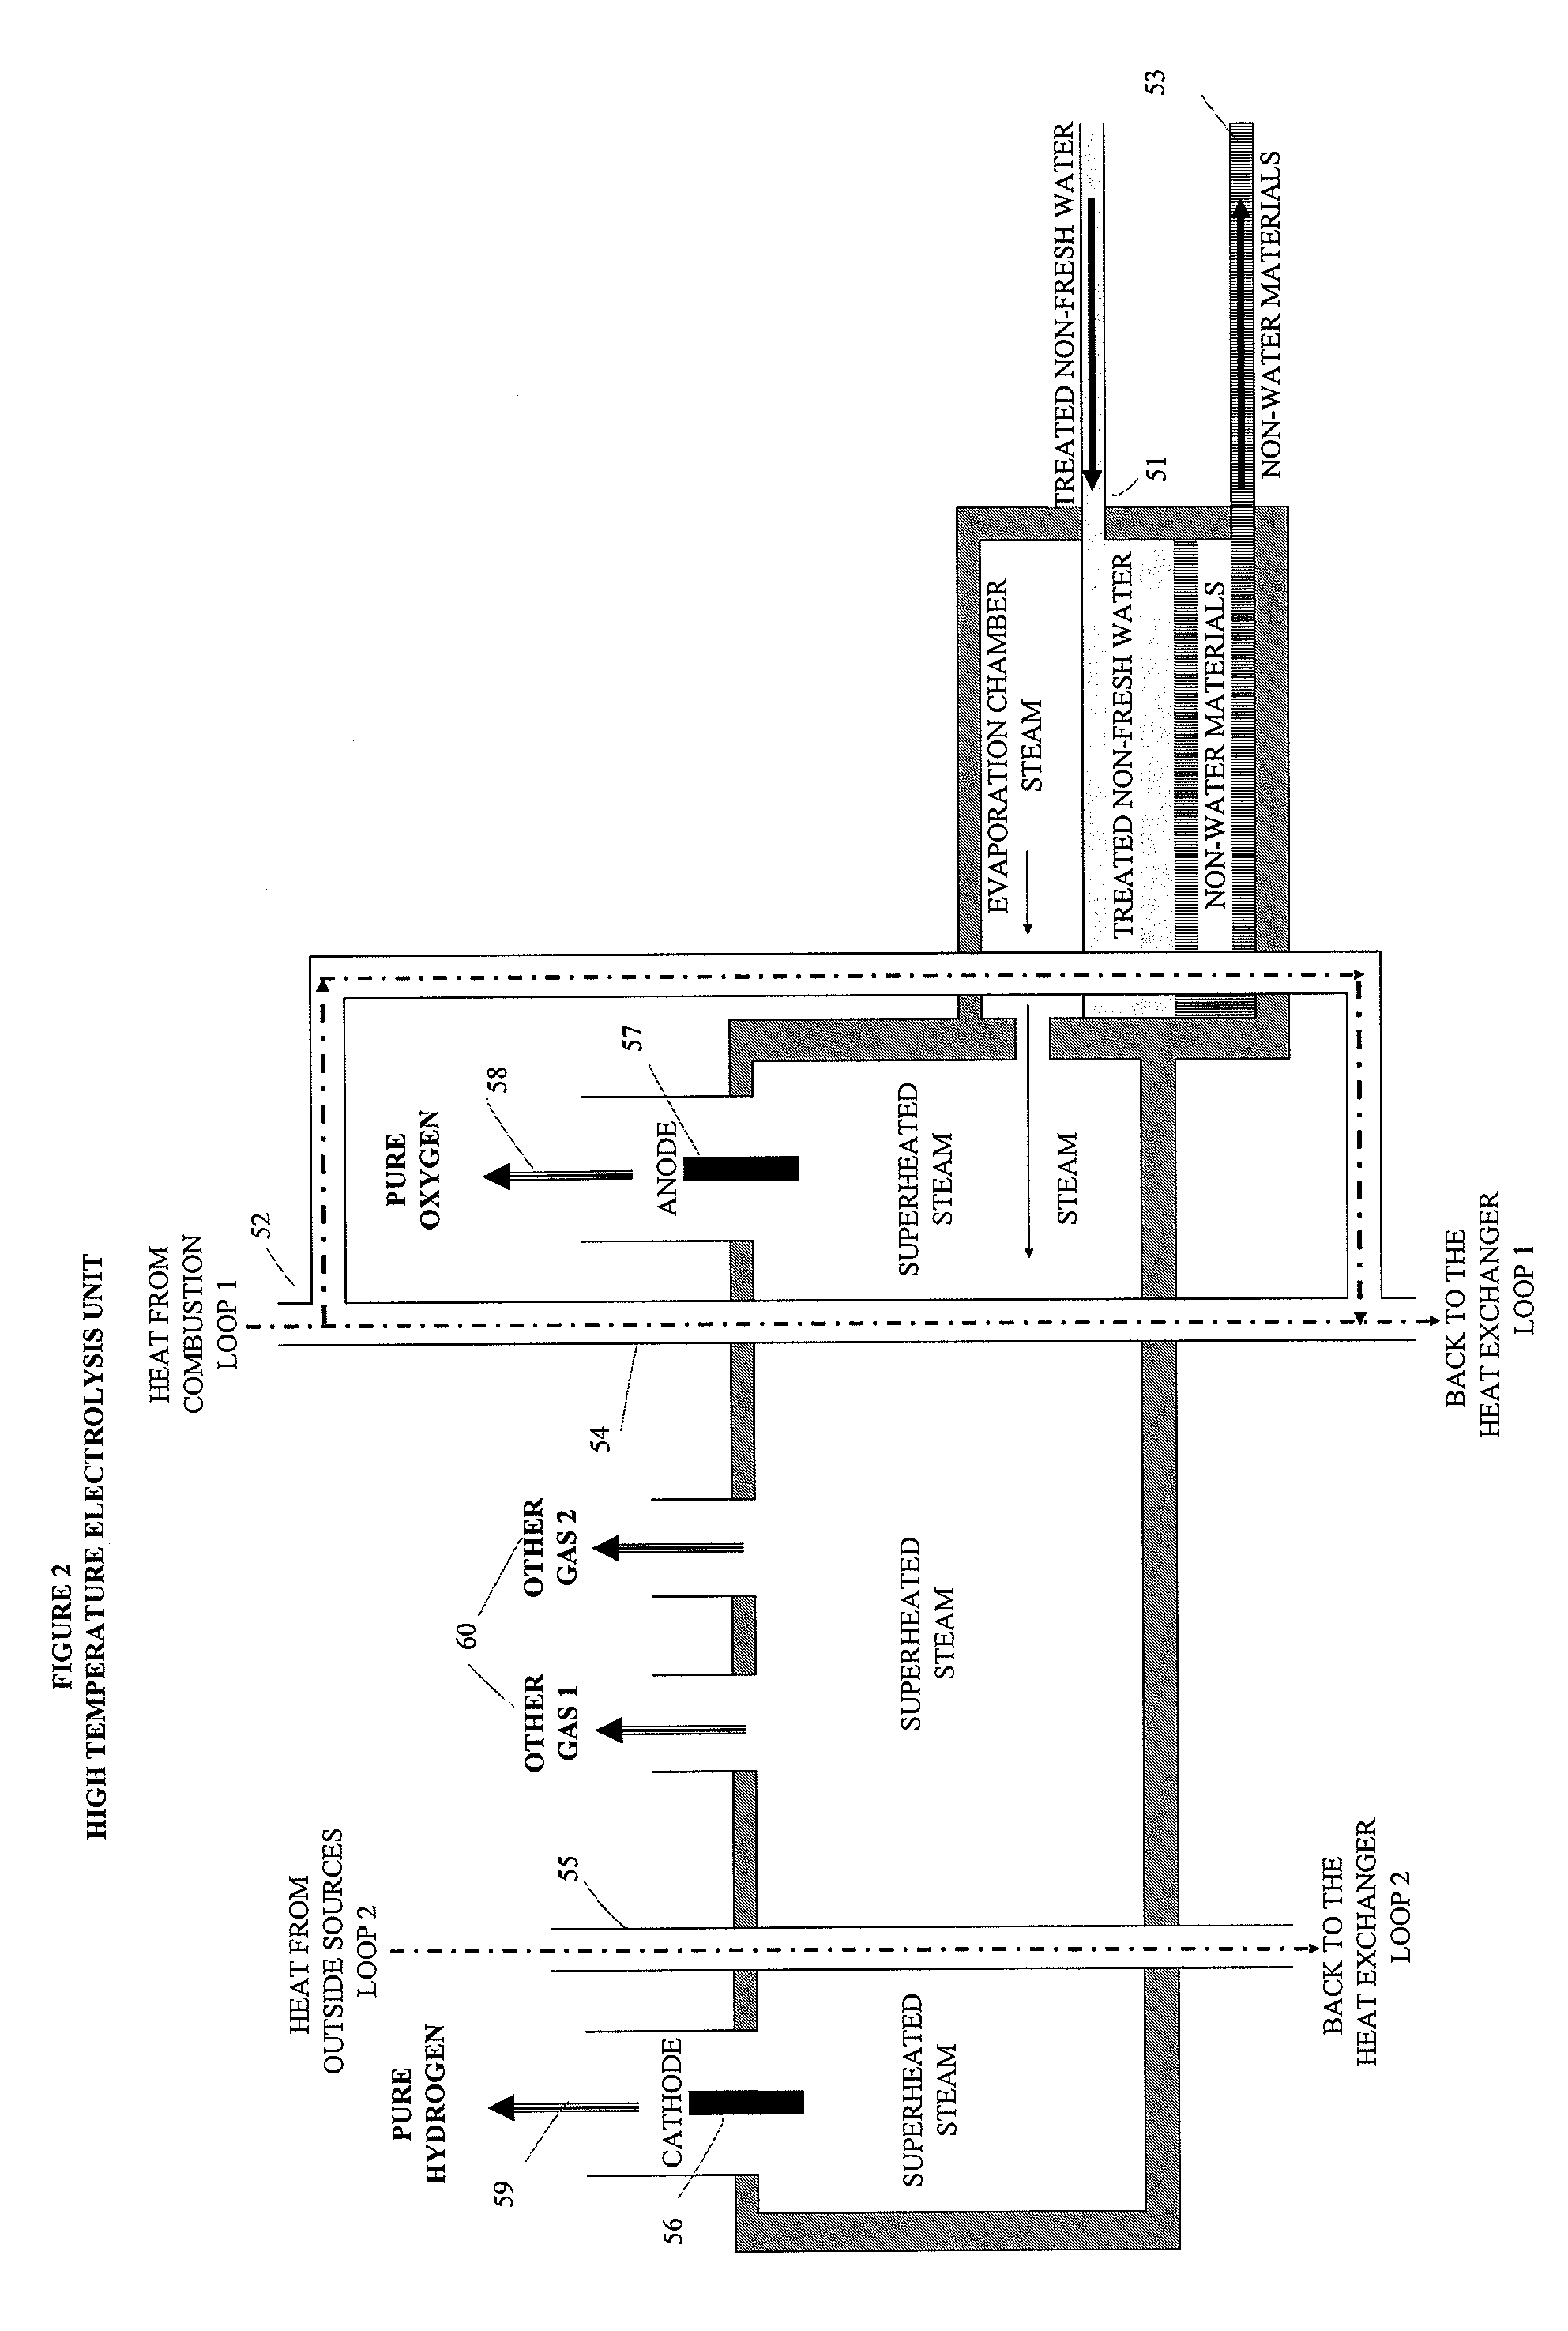 System and process for converting non-fresh water to fresh water